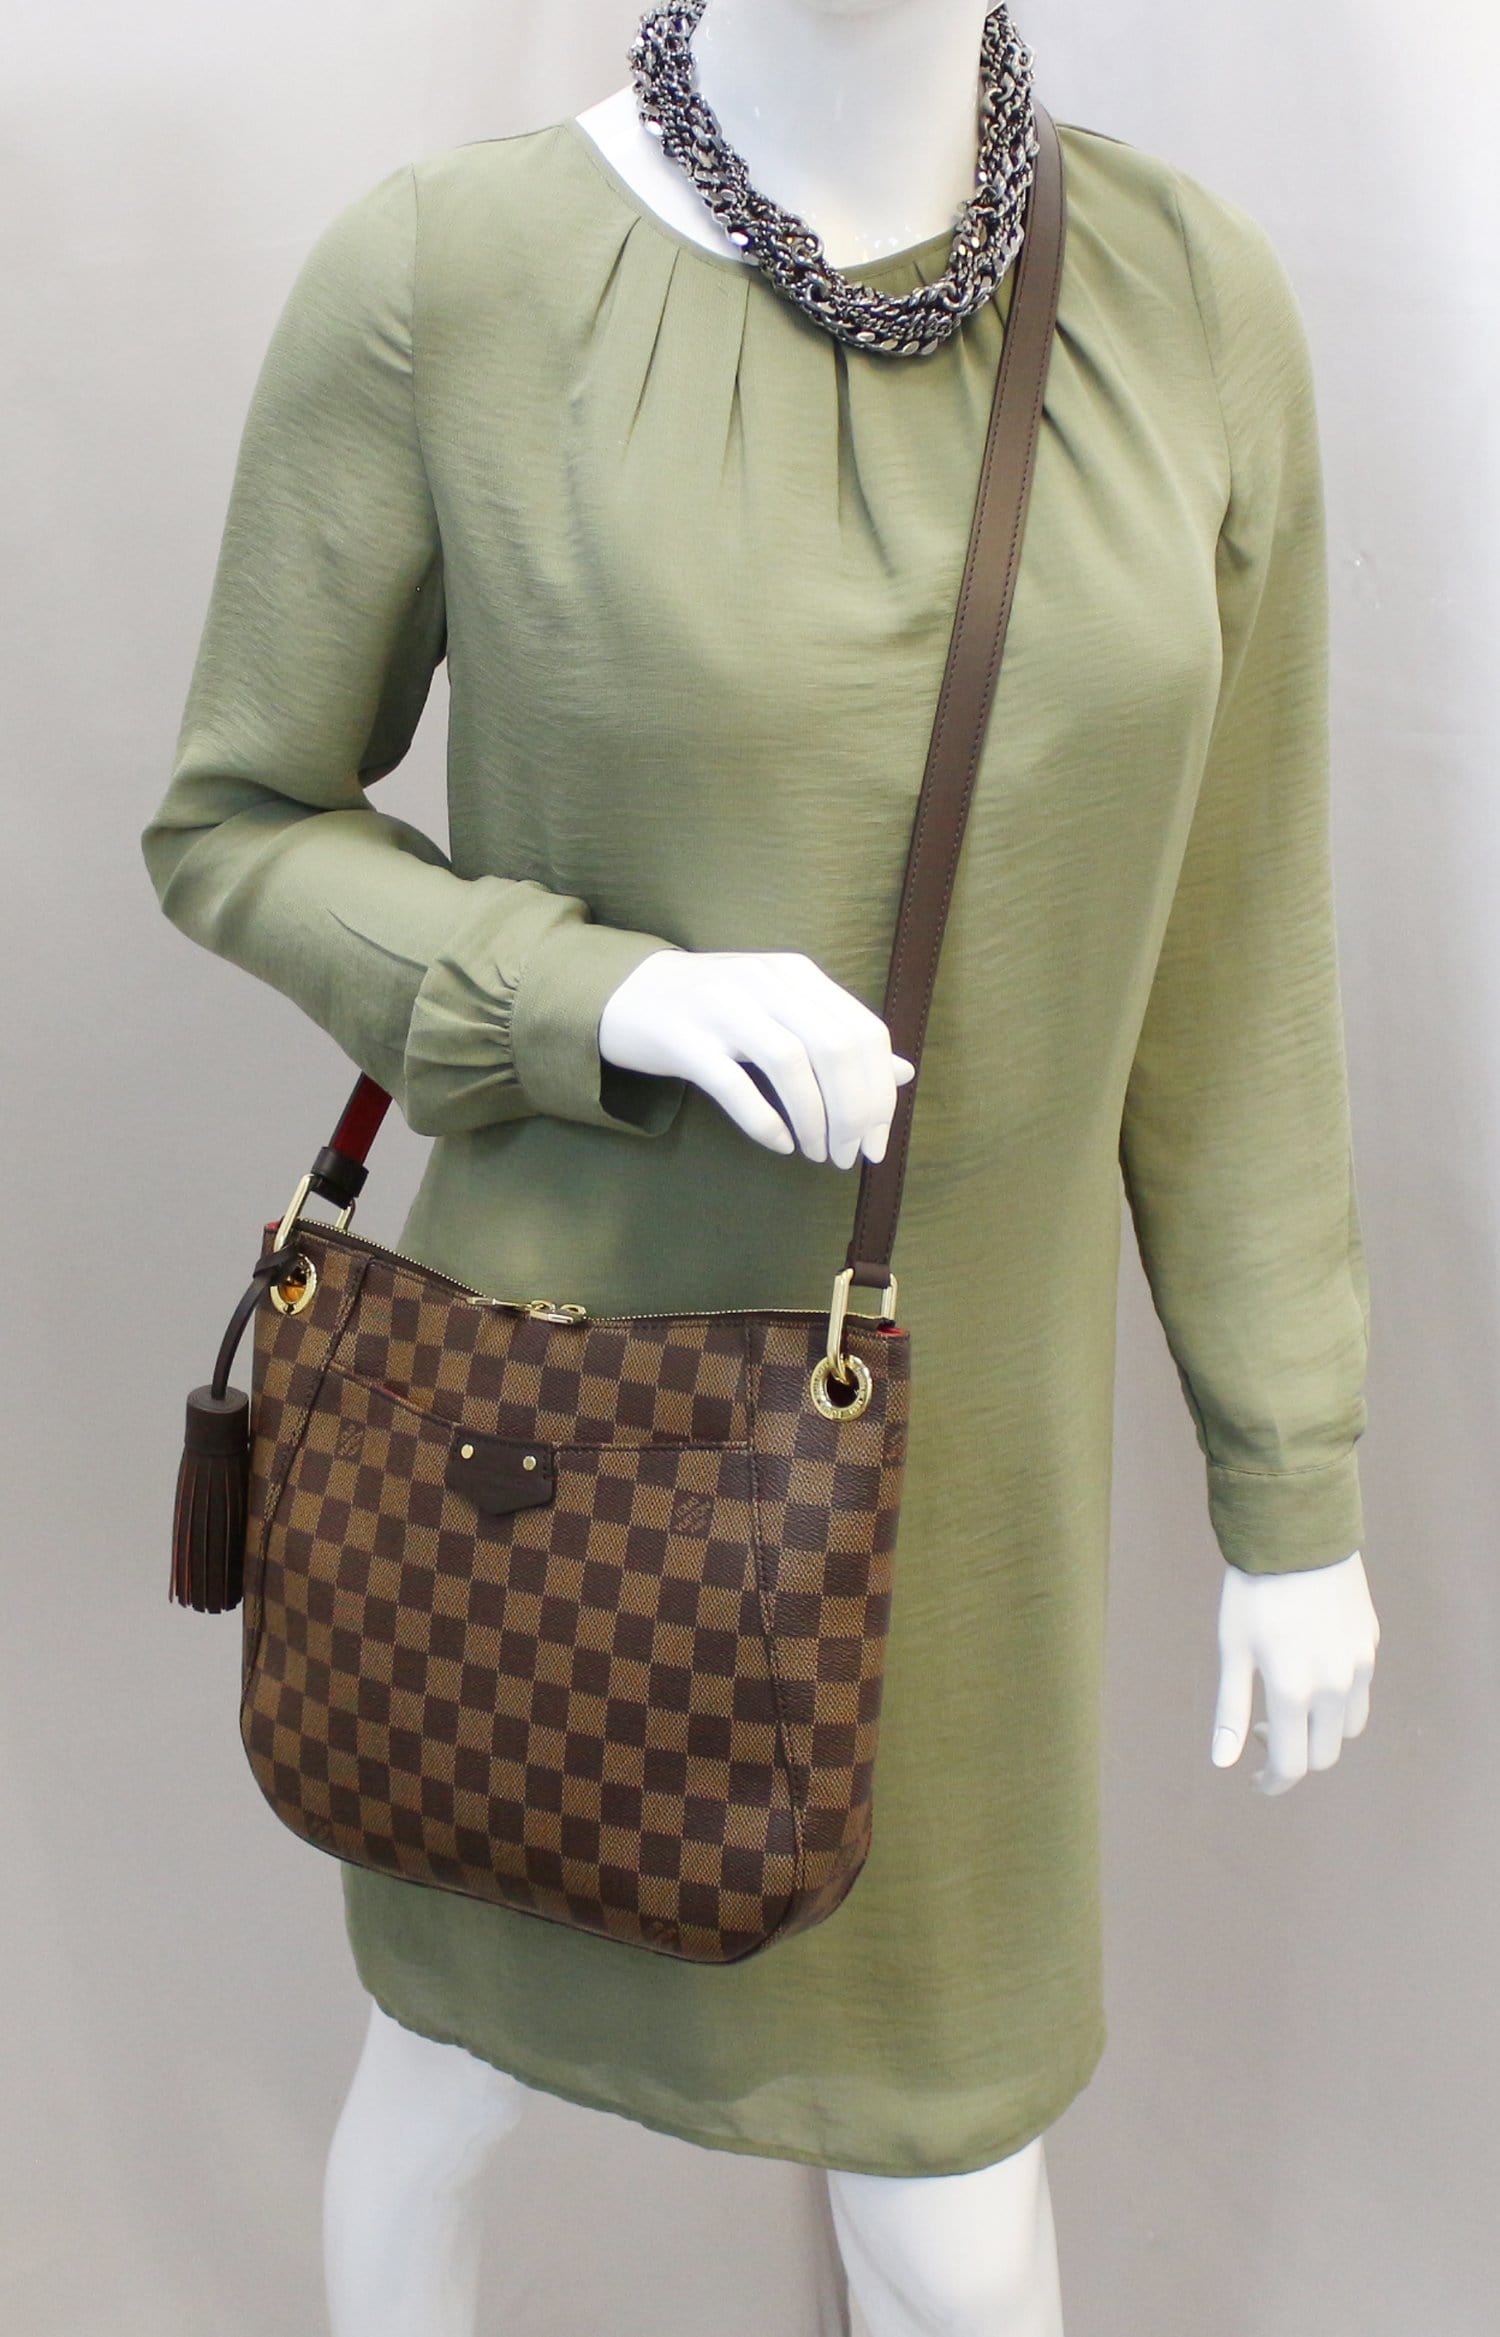 Buy Online Louis Vuitton-DAMIER SOUTH BANK BESACE with Attractive